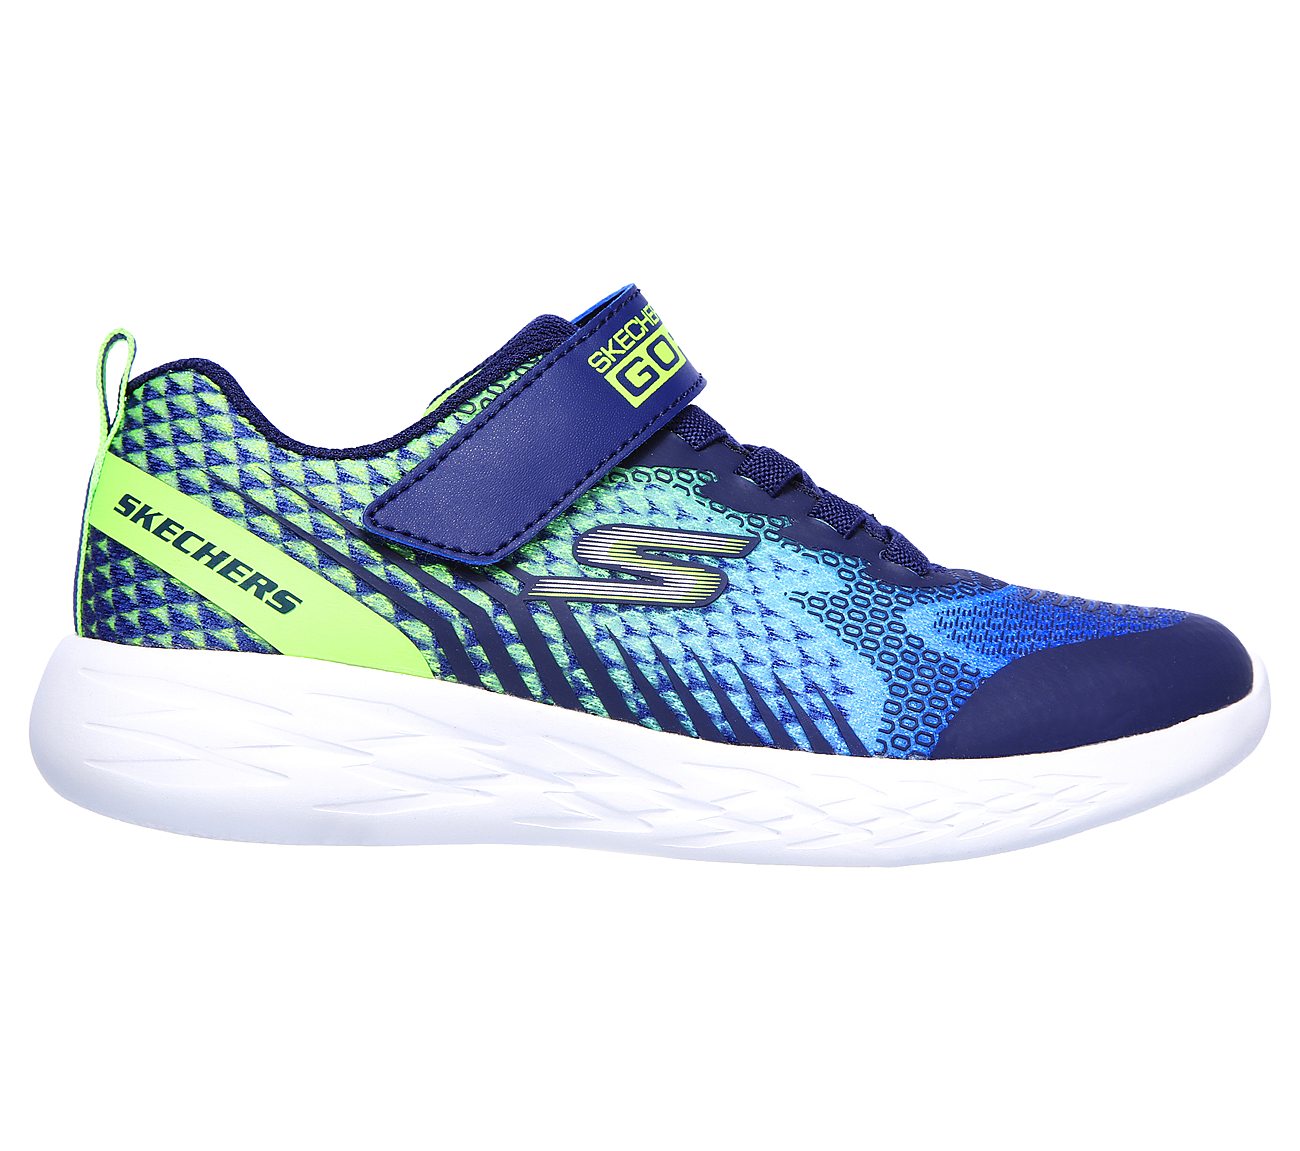 GO RUN 600 - BAXTUX, NAVY/LIME Footwear Right View